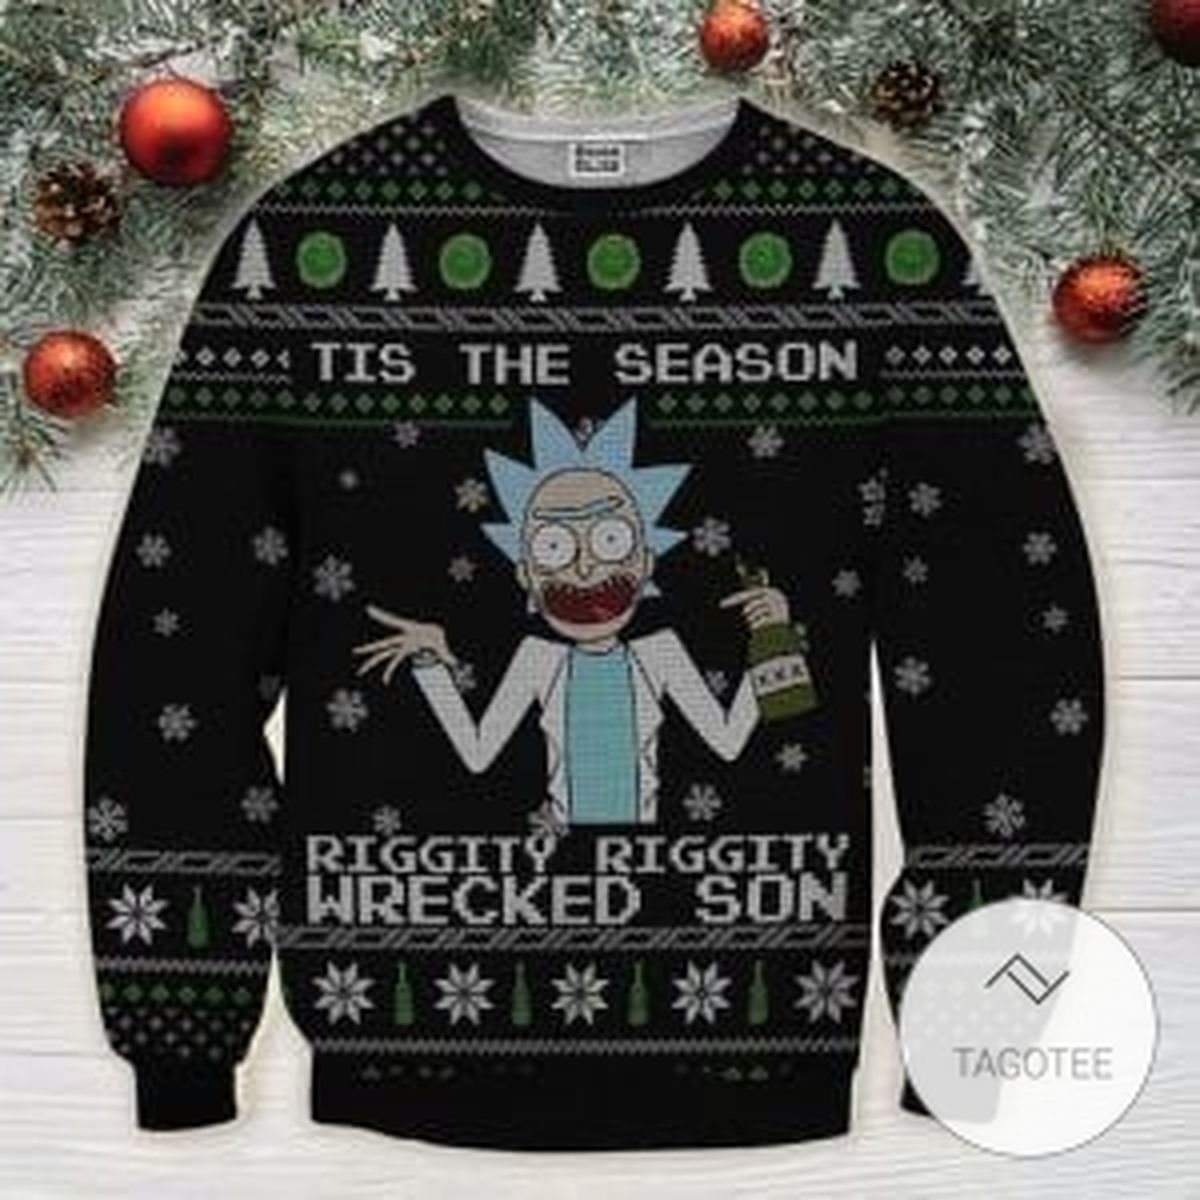 Tis The Season Riggity Riggity Wrecked Son Sweatshirt Knitted Ugly Christmas Sweater